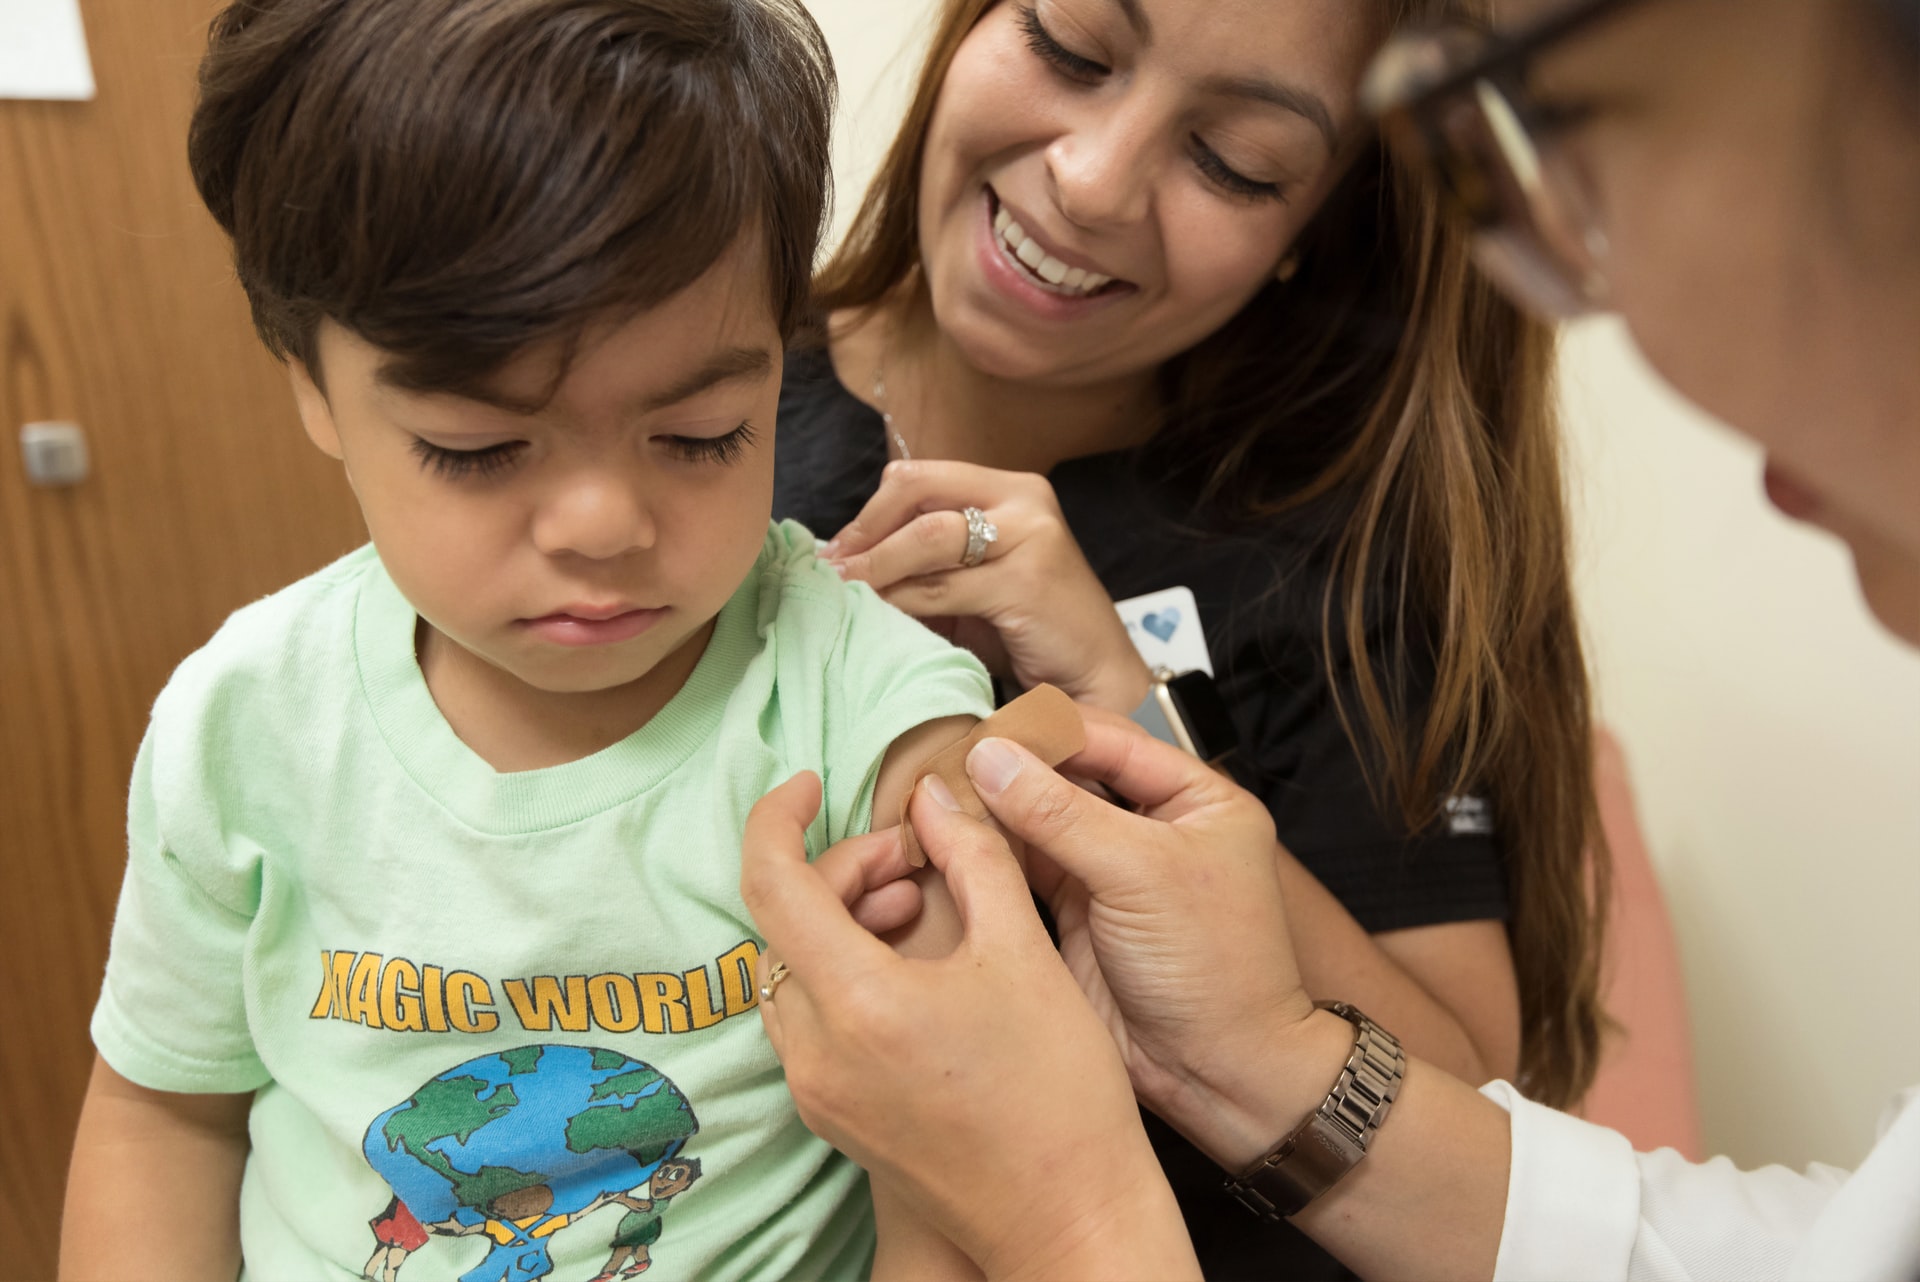 Young kids will likely have COVID vaccine access in the next few weeks